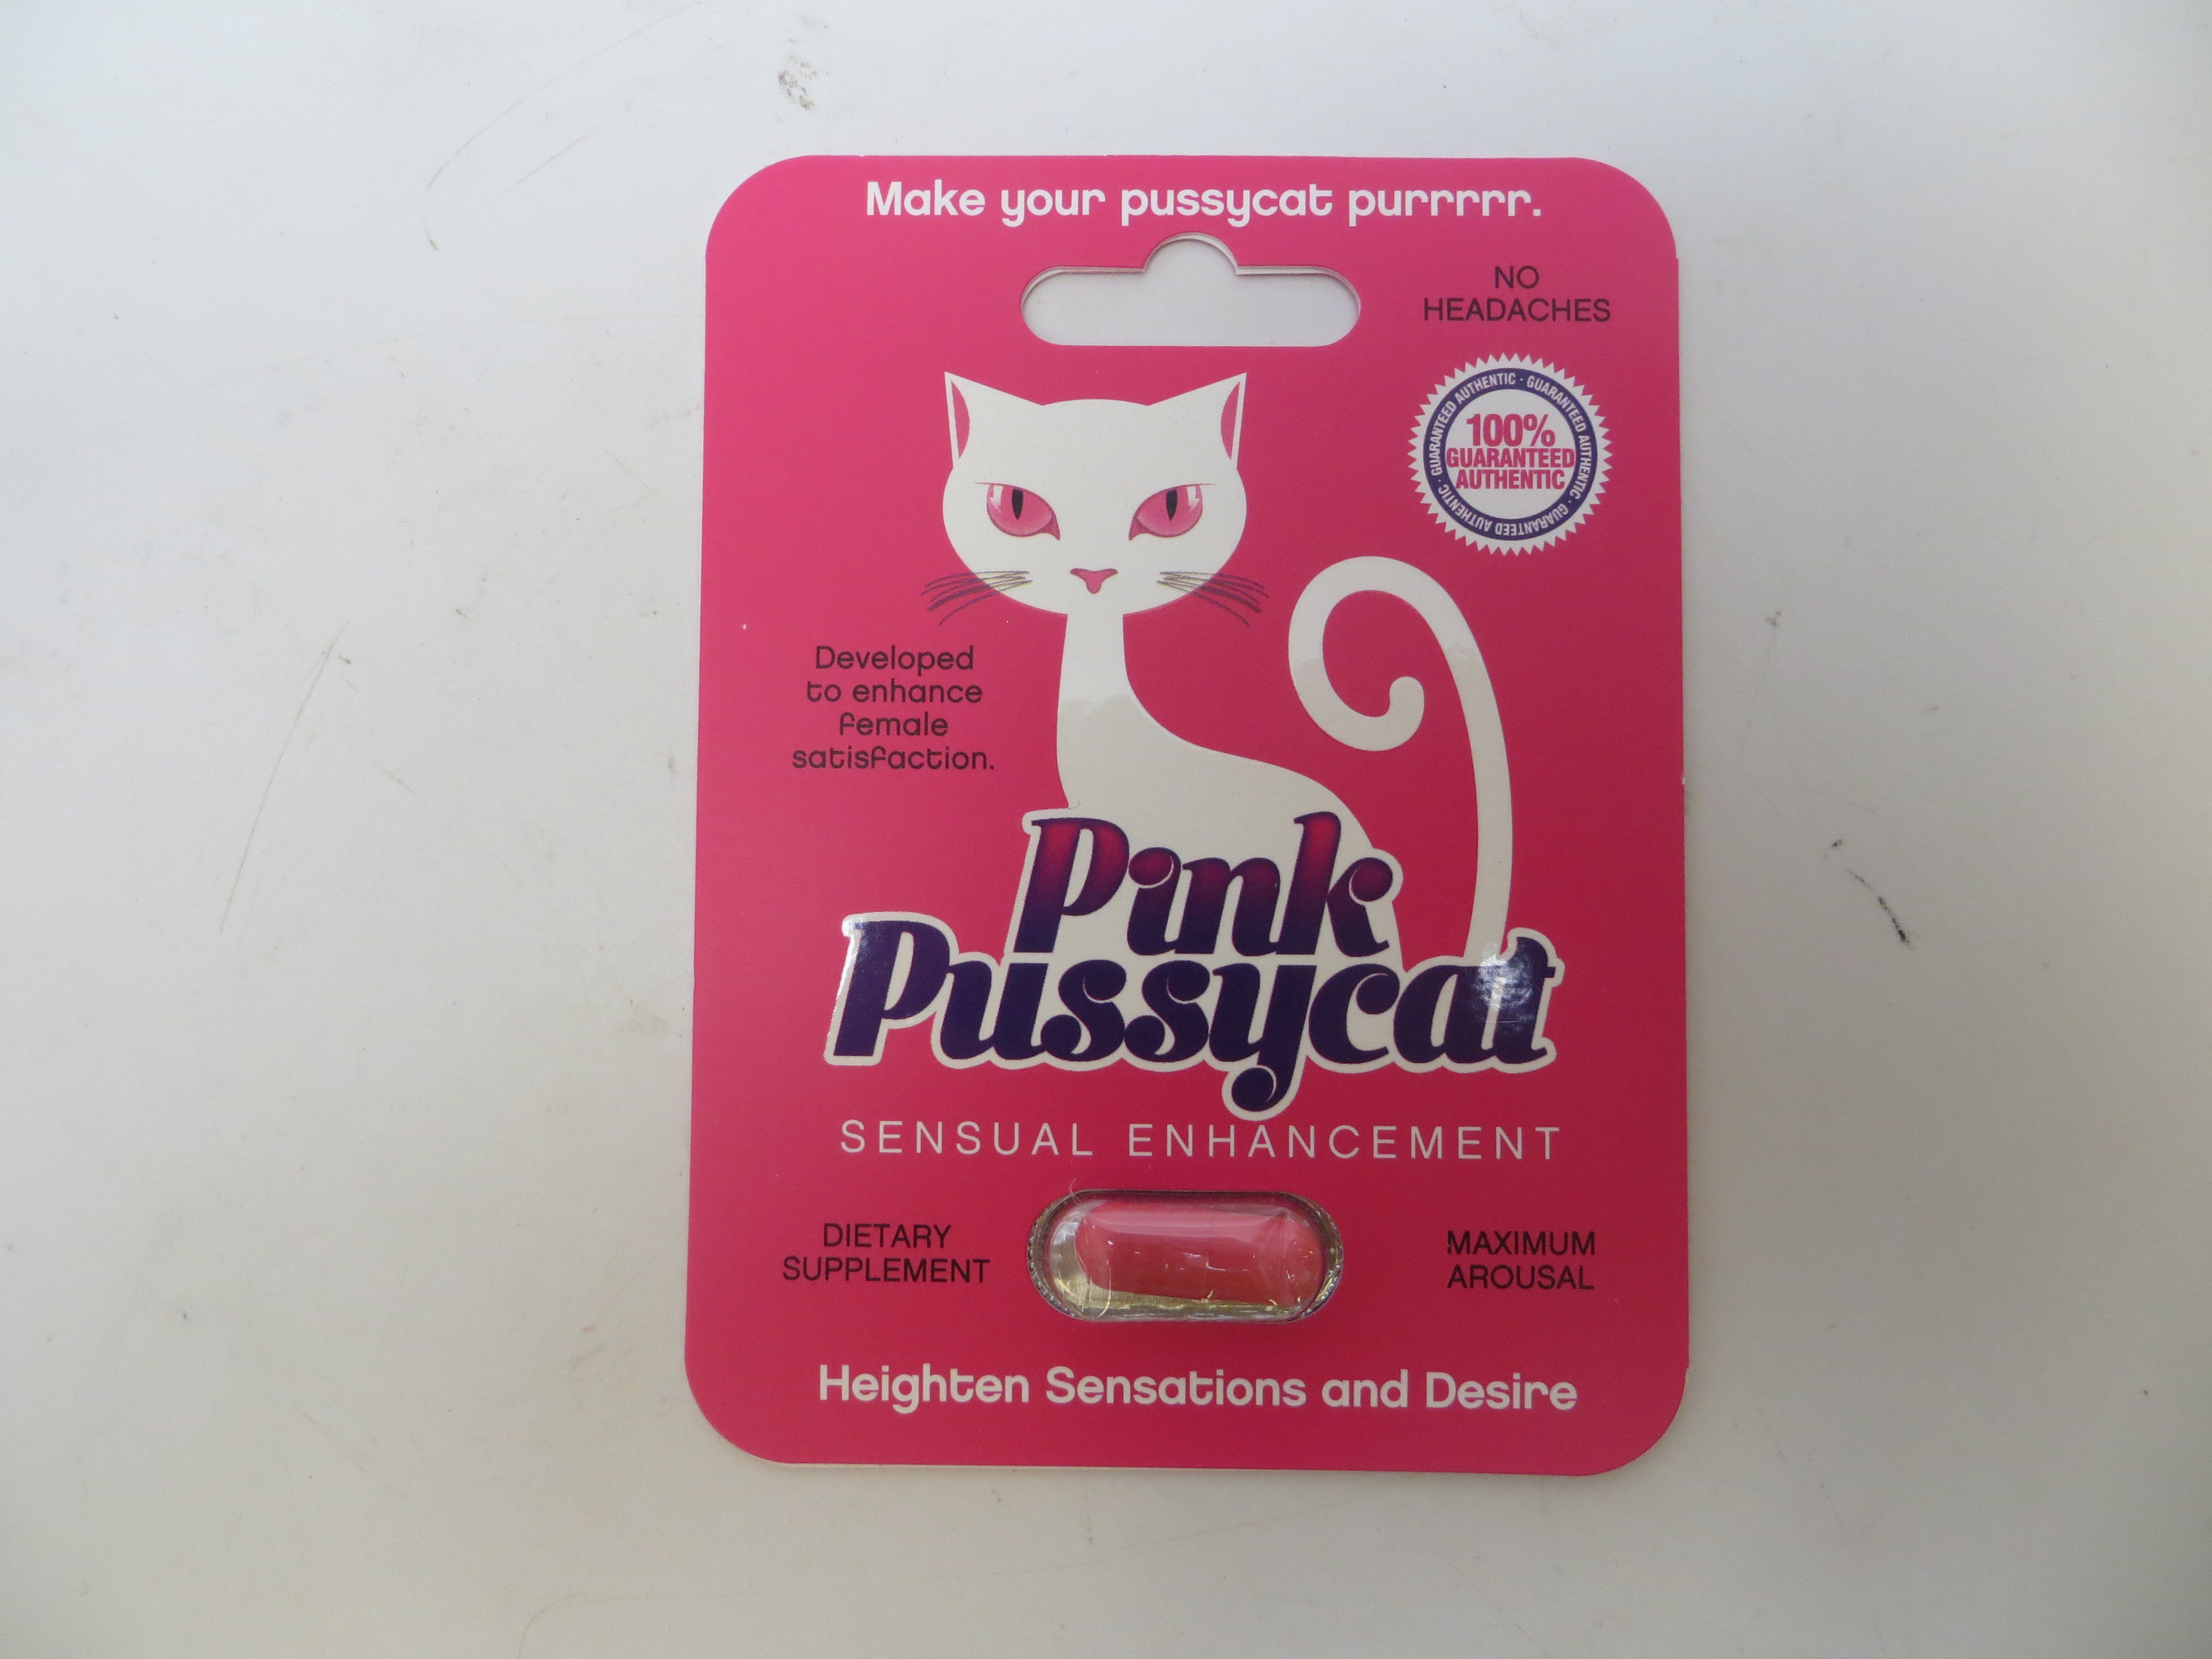 chad stoneking recommends pussy cat pill review pic